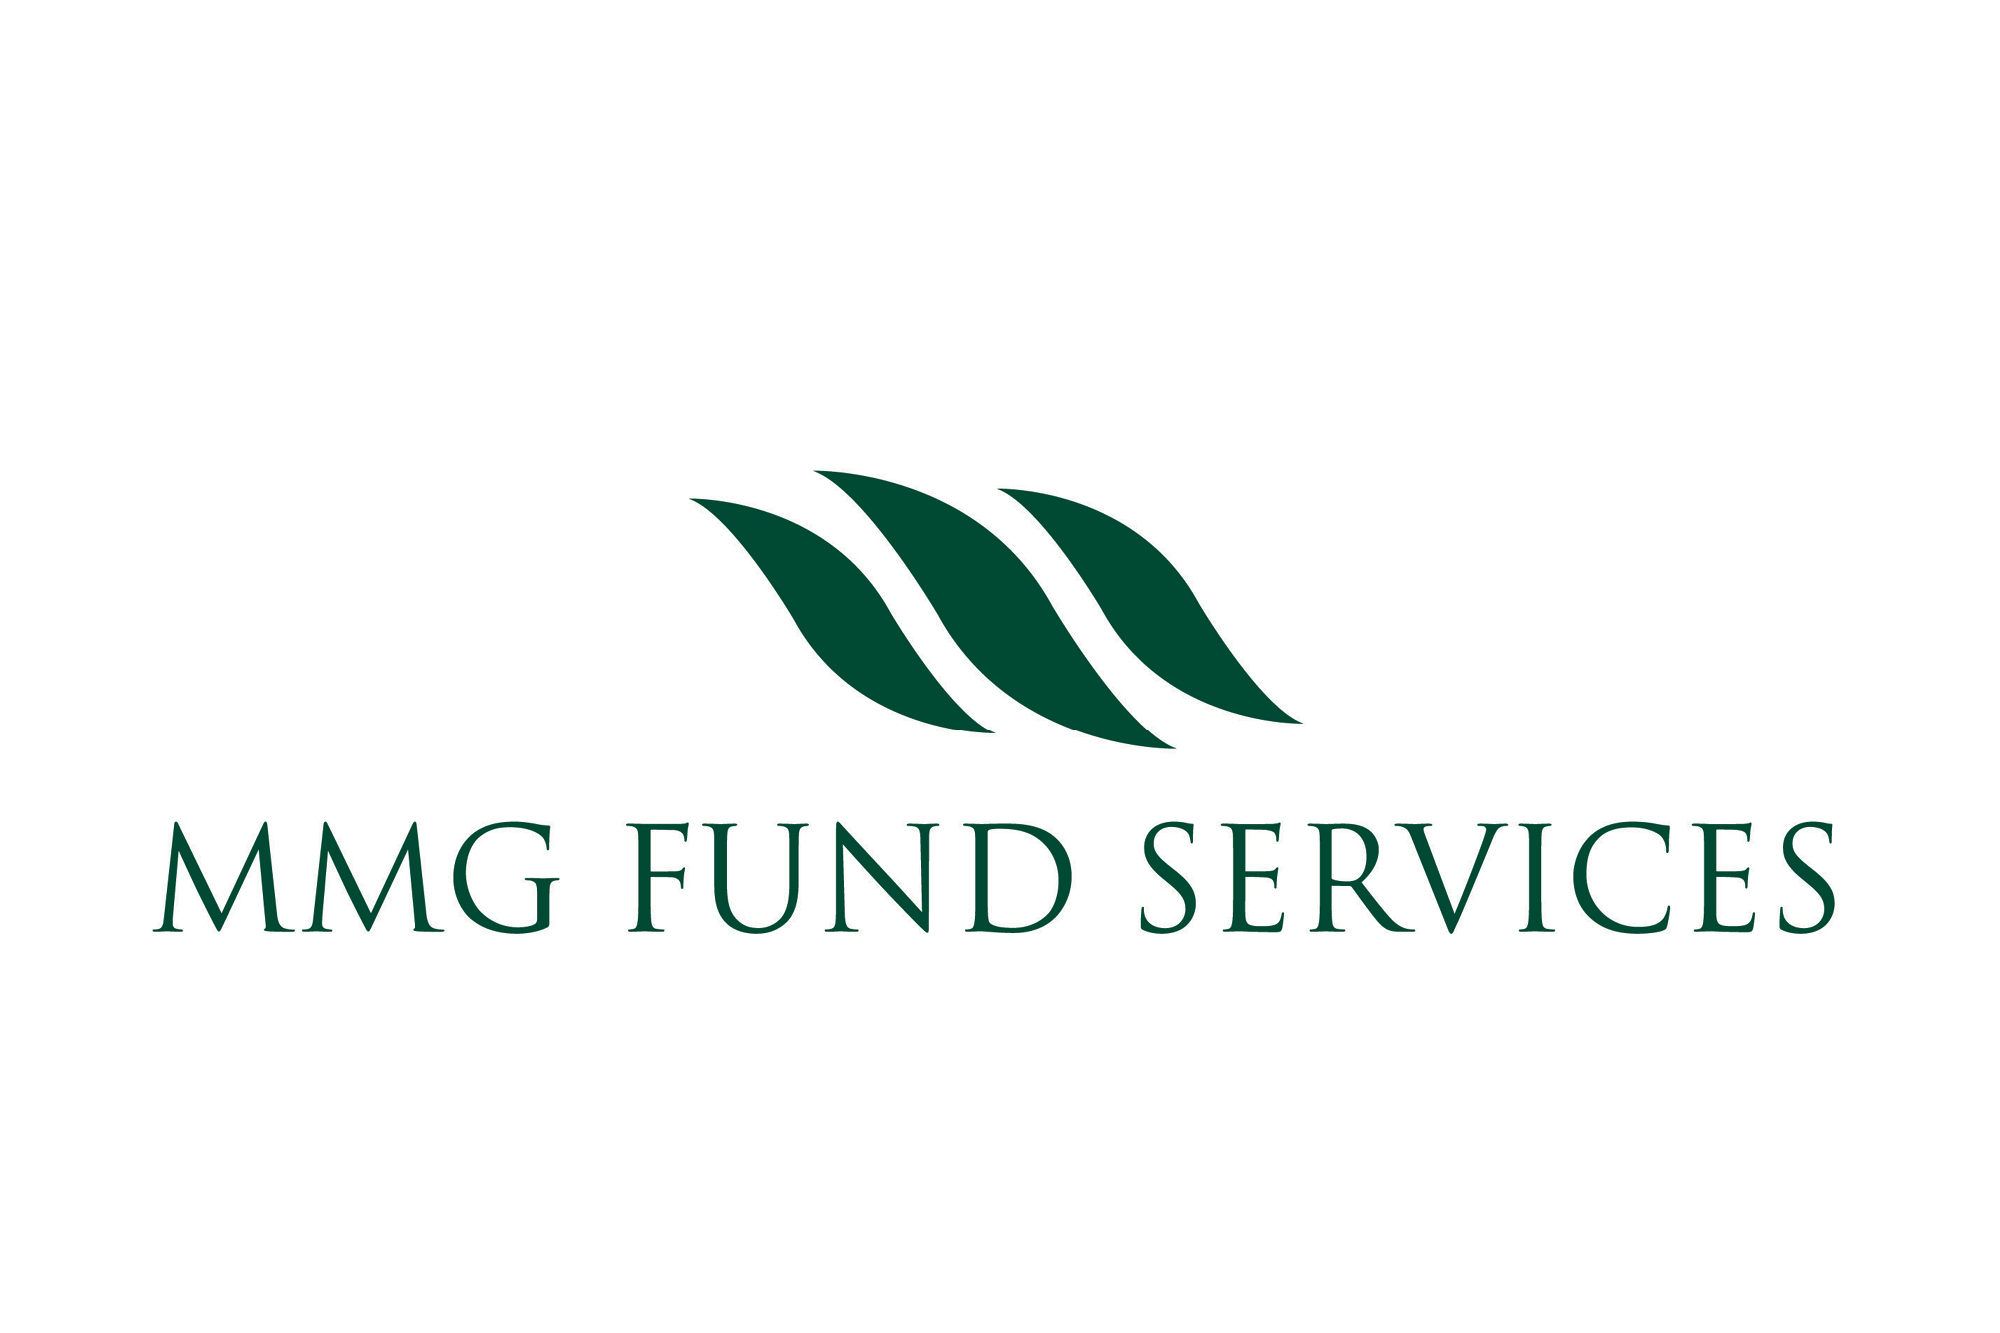 MMG FUND SERVICES